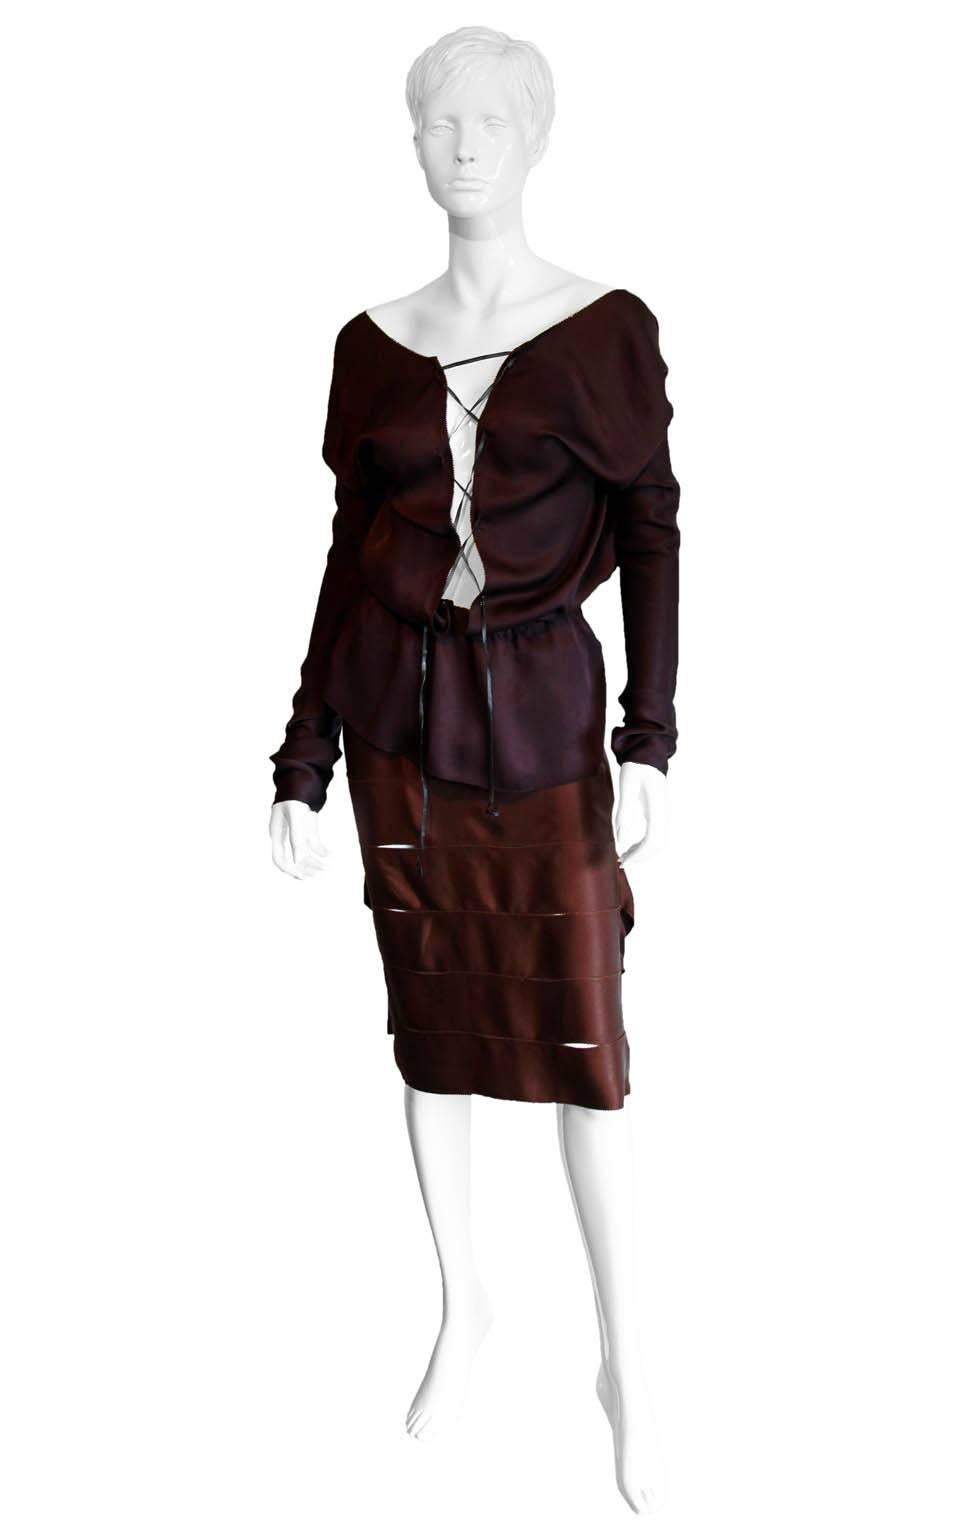 That Amazing Tom Ford For Gucci Fall Winter 2002 Brown Silk Gothic Collection Kimono Runway Top & Ribbon Skirt!

Who could ever forget Tom Ford's fall/winter 2002 Gothic Collection for Gucci... with that dark chinoiseriesque styling & heavenly